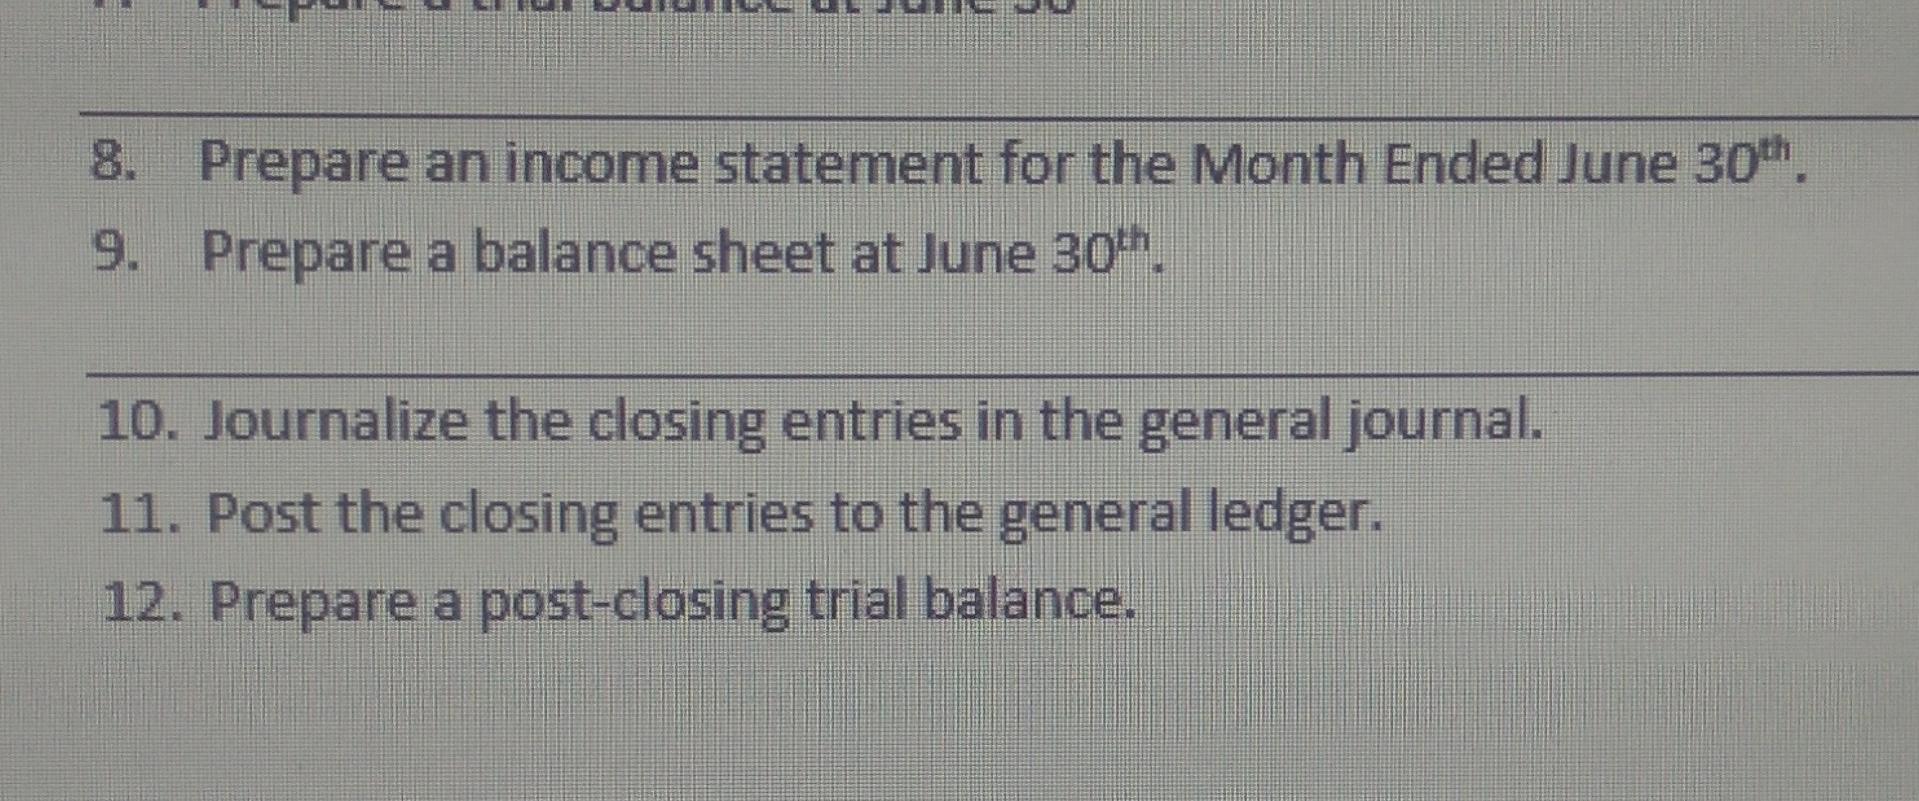 8. Prepare an income statement for the Month Ended June 30th. 9. Prepare a balance sheet at June 30th. 10.